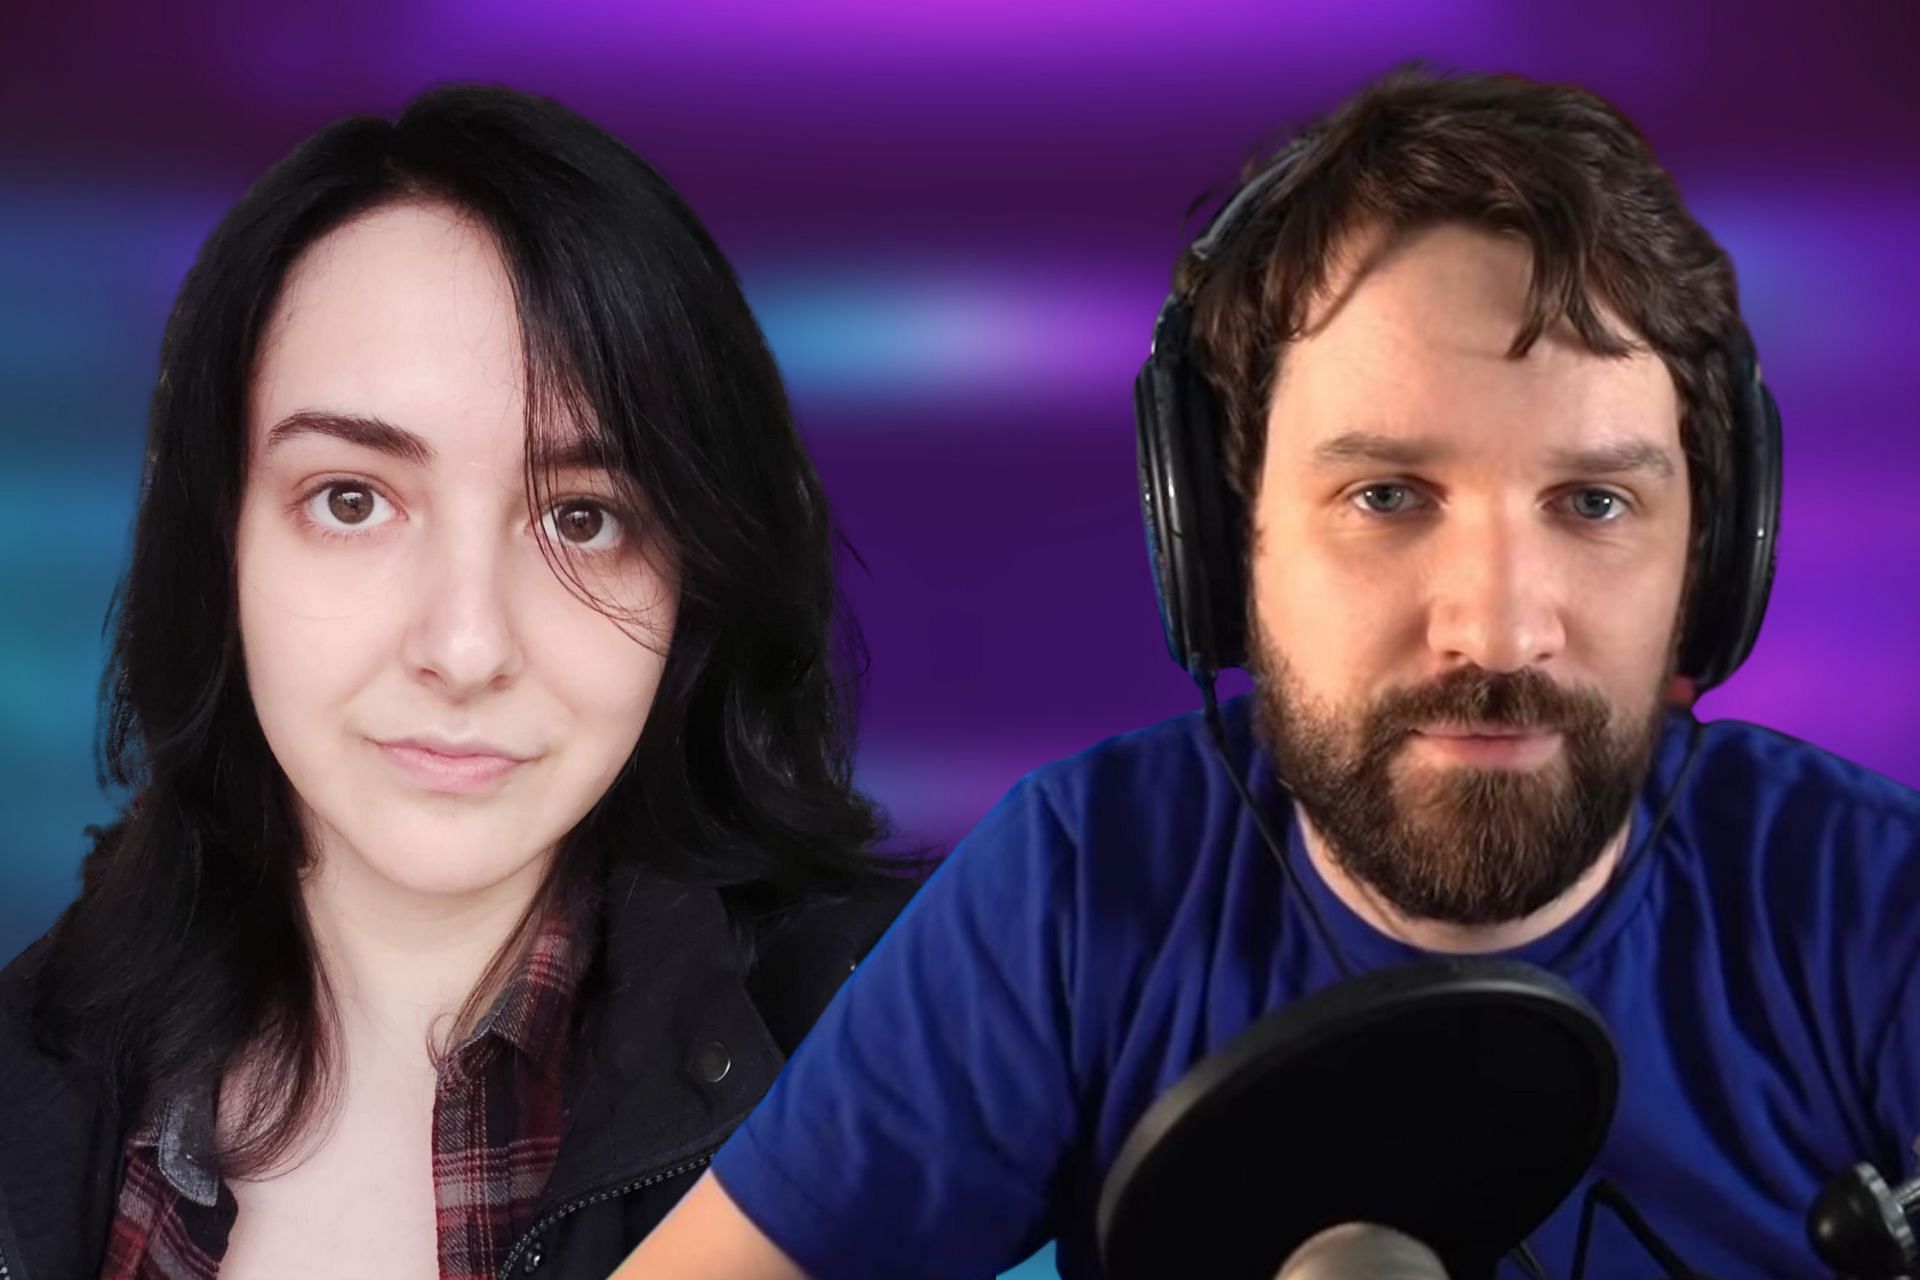 Kefalls gets banned from Twitch moments after announcing Destiny expose (Image via Sportskeeda)